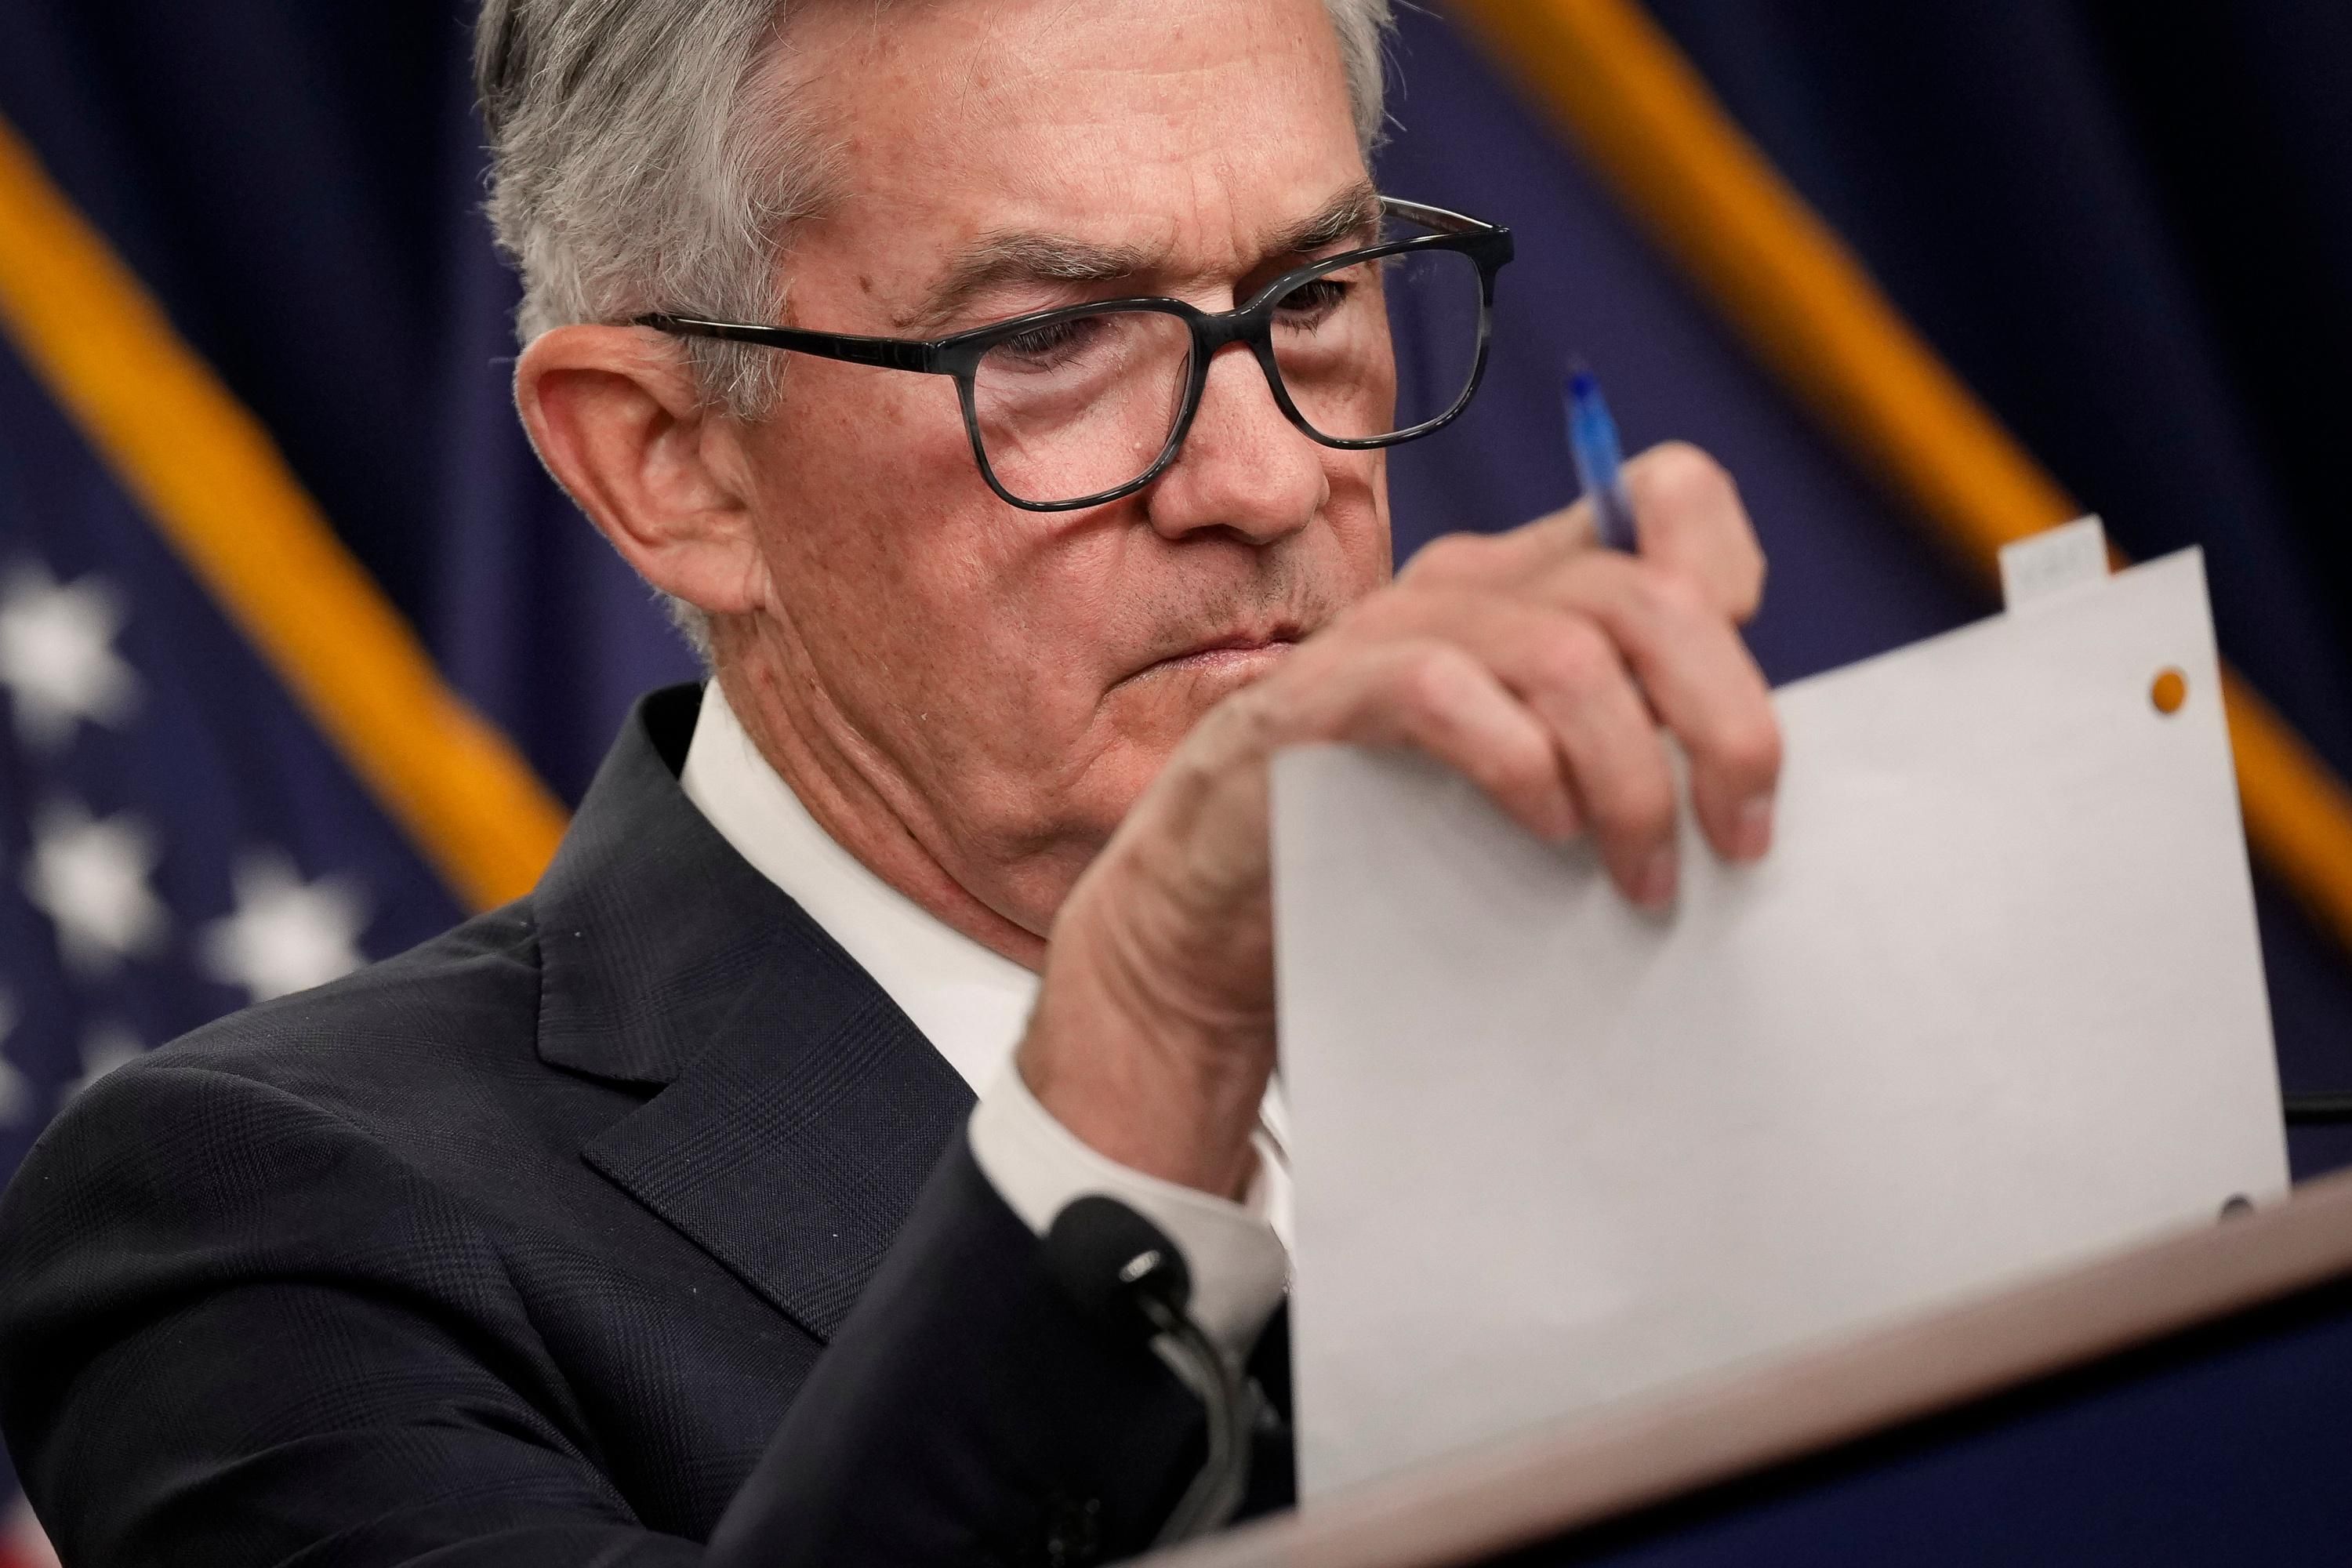 Fed Chair Jerome Powell looks at notes during a press conference